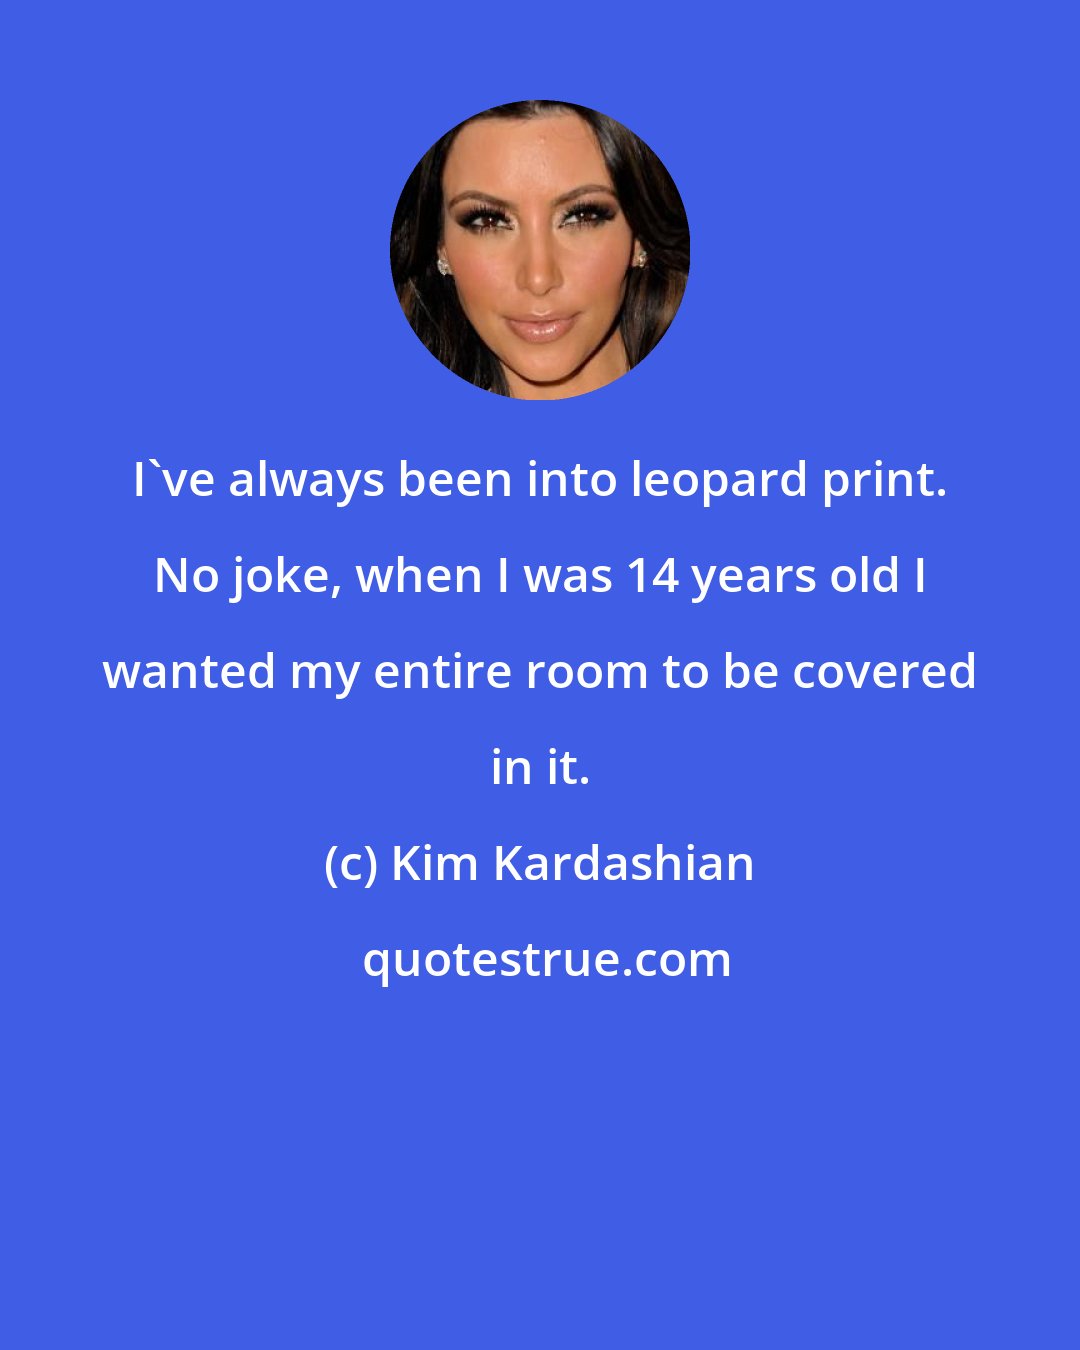 Kim Kardashian: I've always been into leopard print. No joke, when I was 14 years old I wanted my entire room to be covered in it.